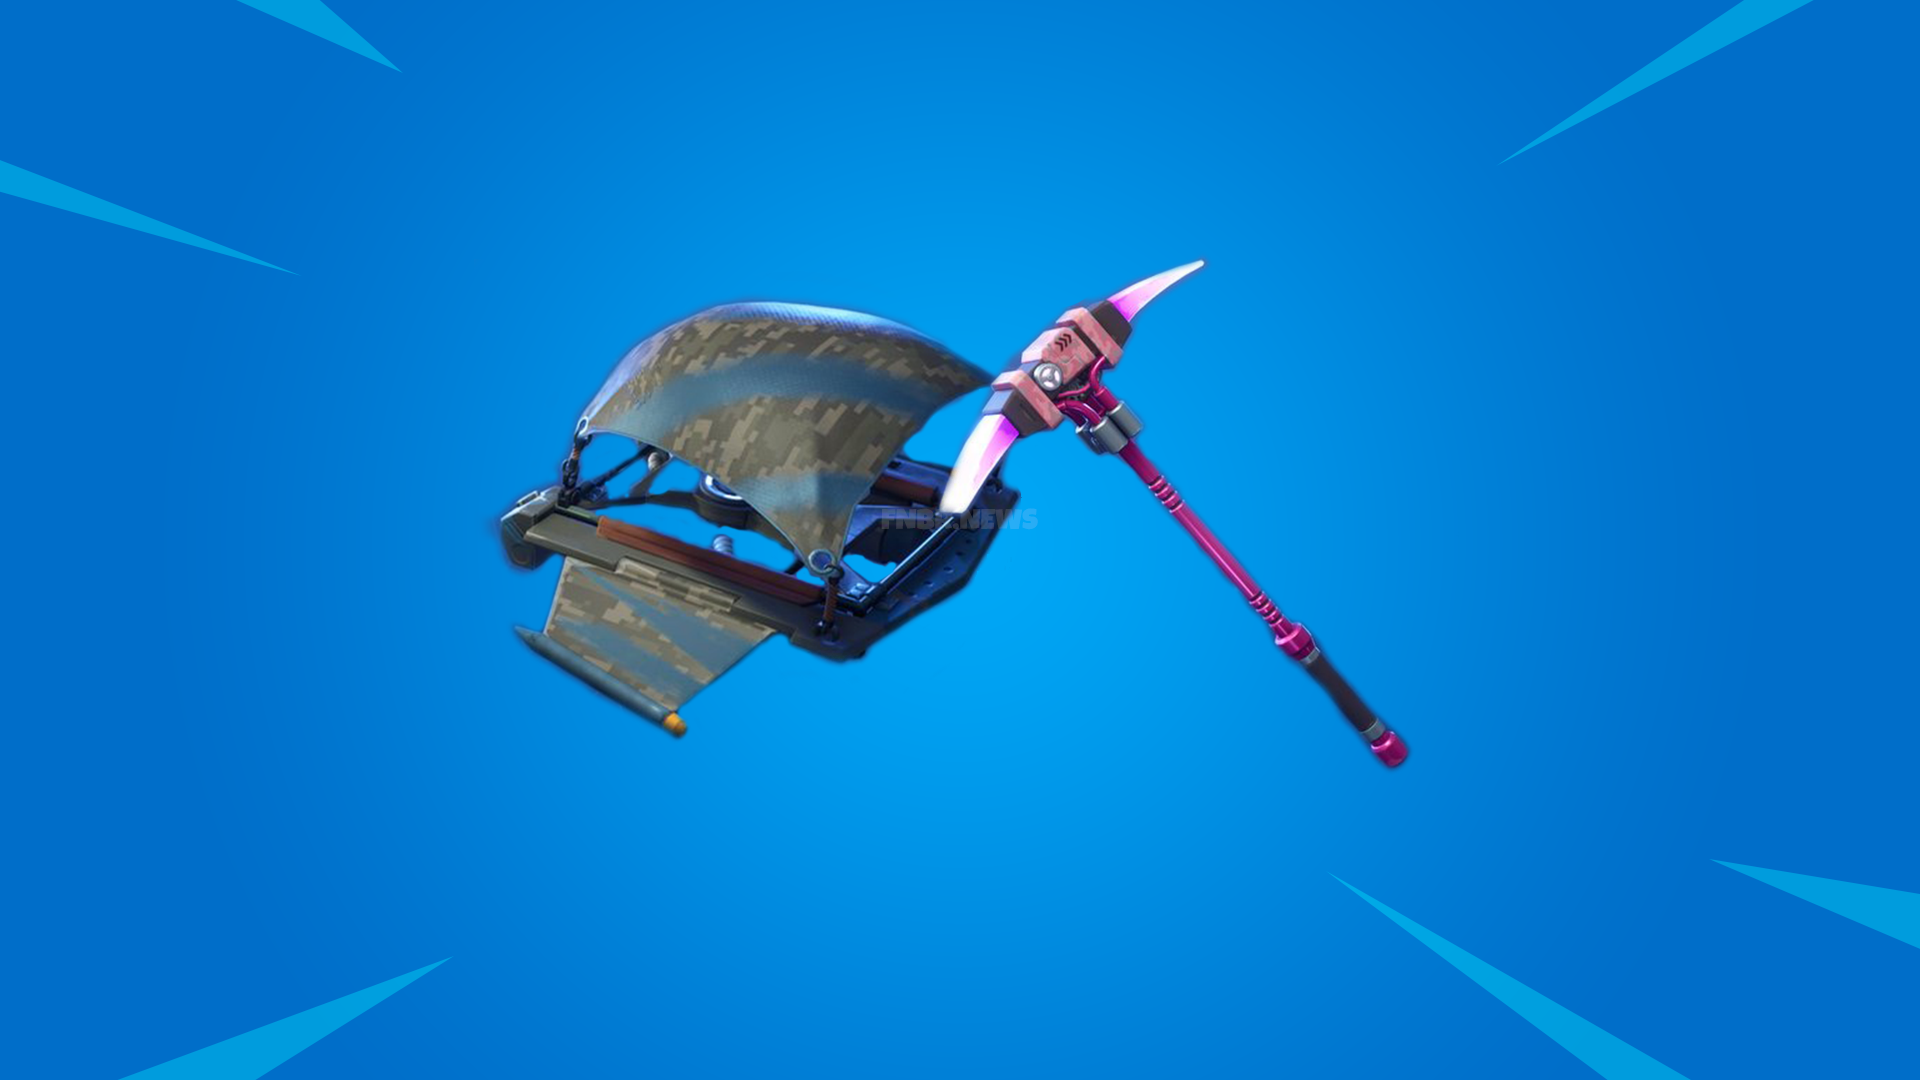 leak more battle royale rewards for save the world founders coming to fortnite - fortnite free pickaxe season 8